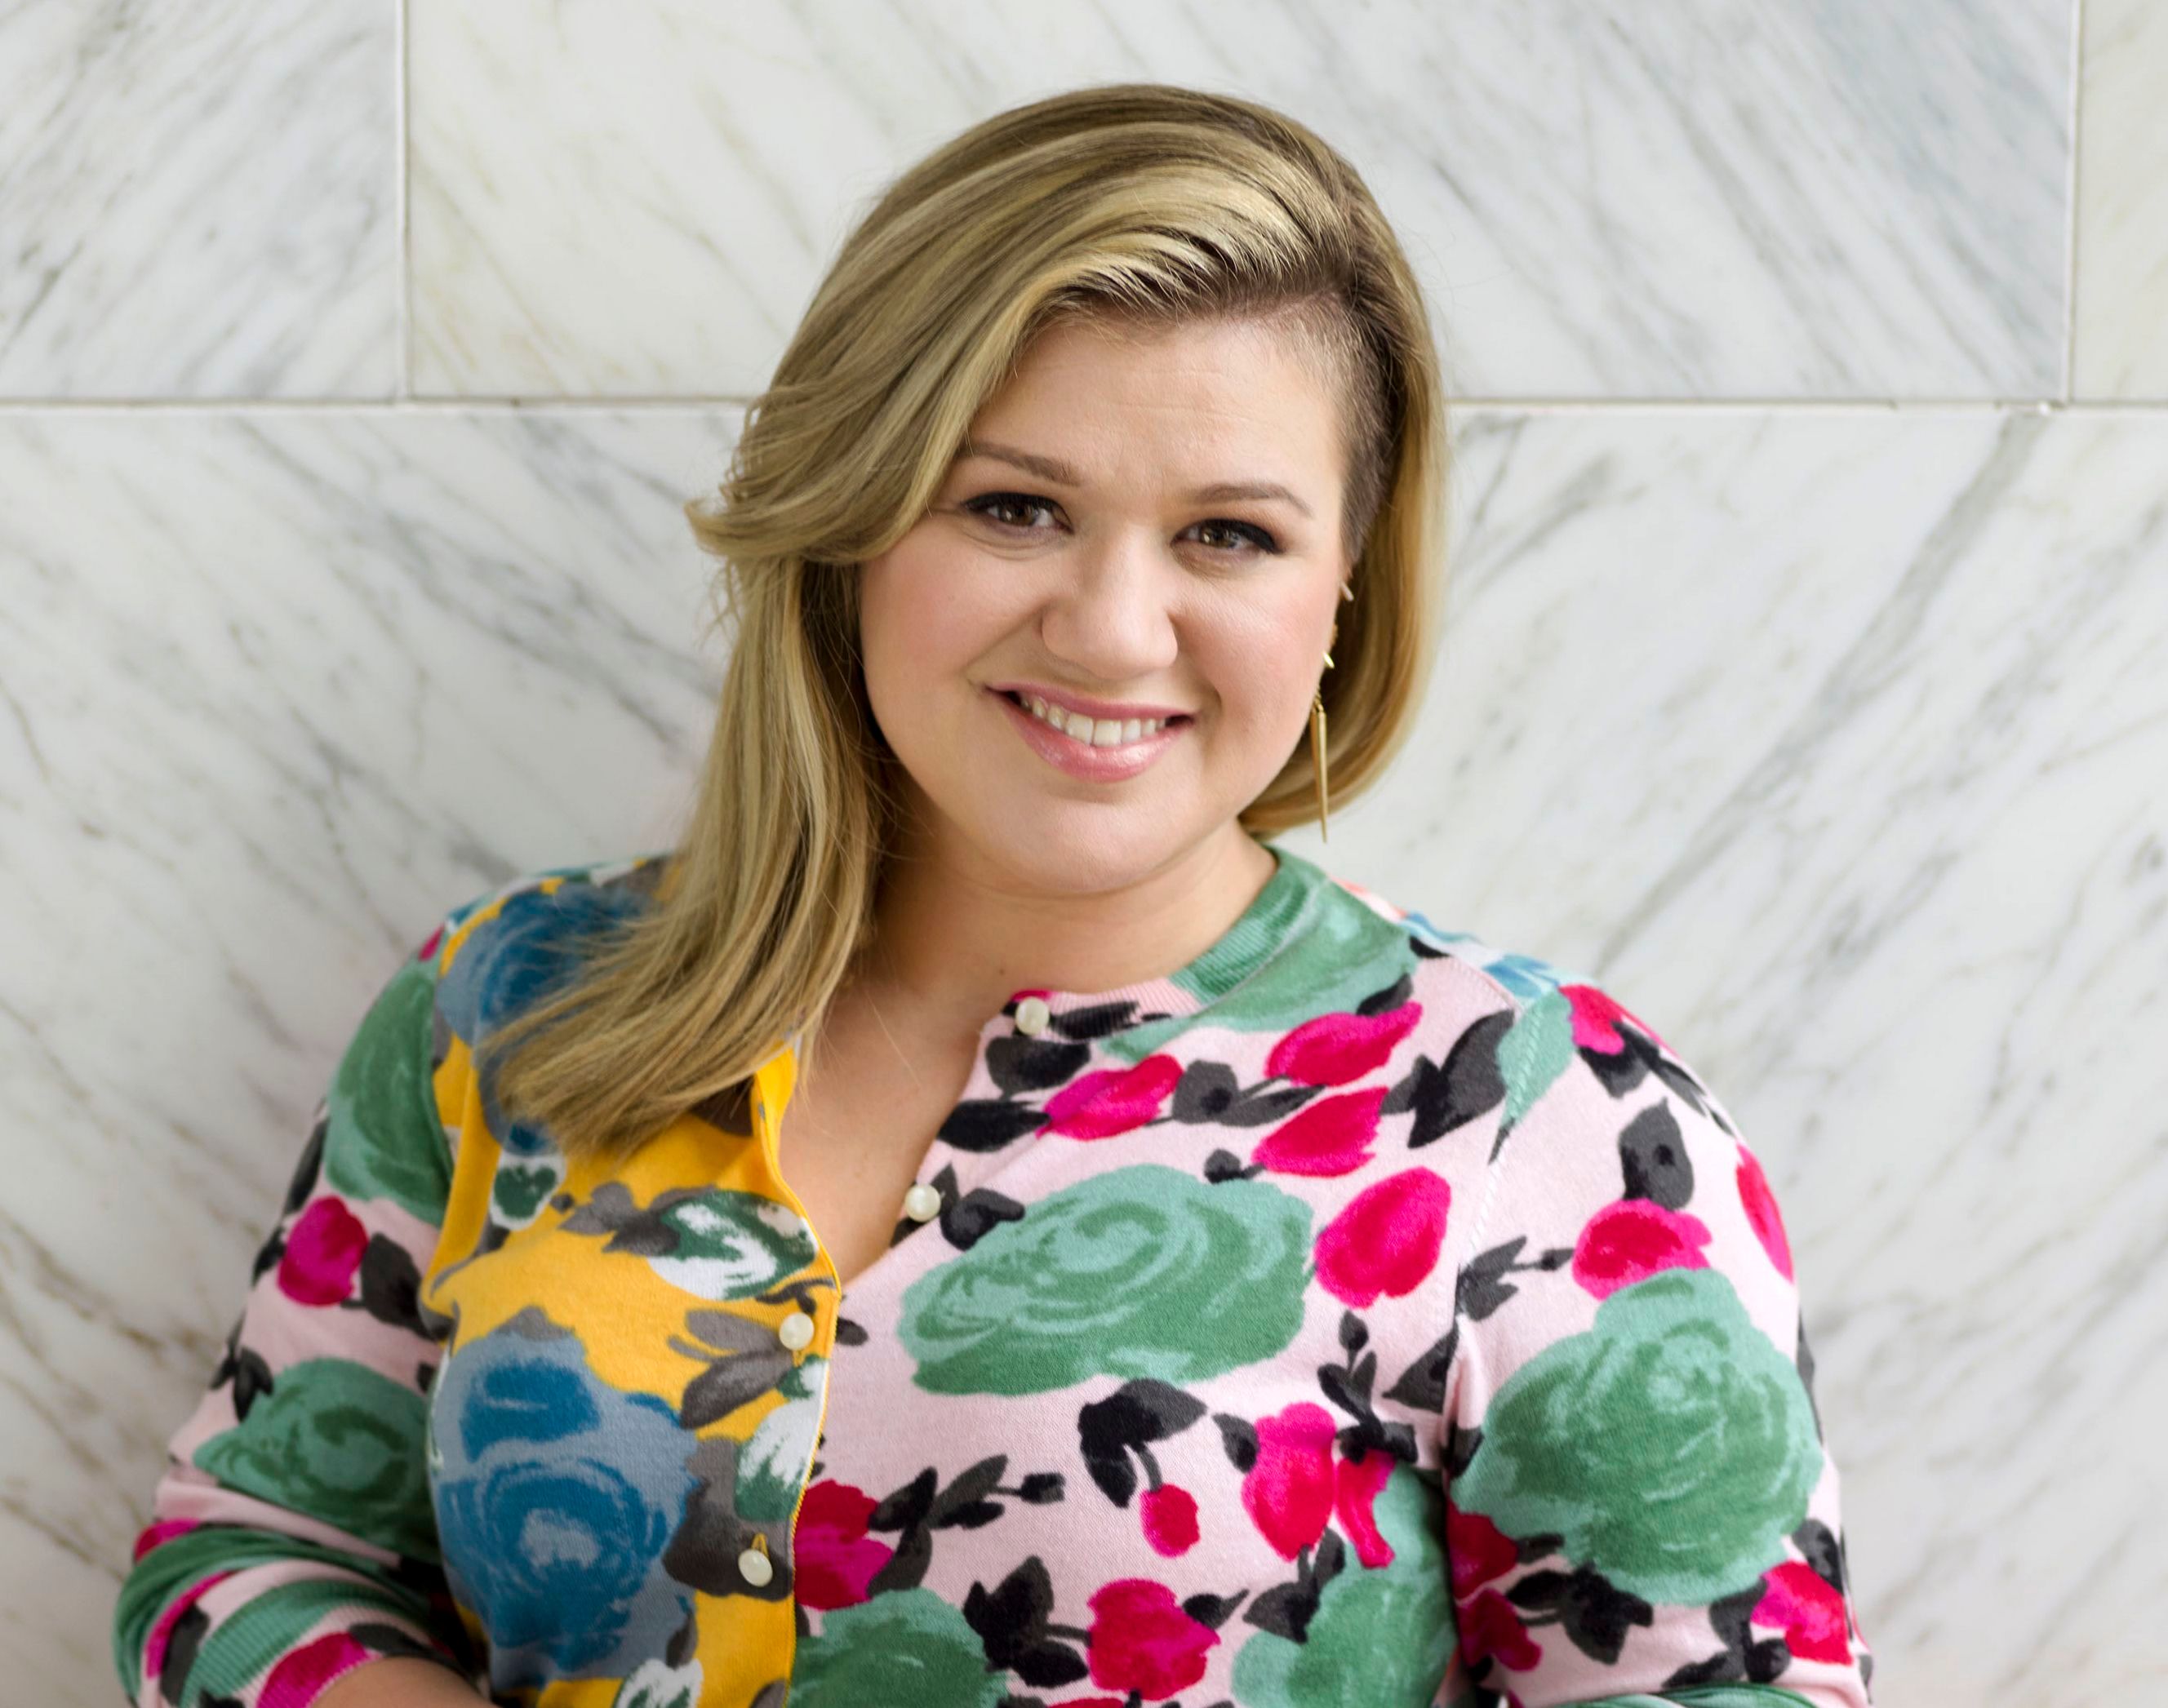 Kelly Clarkson's Hair: Singer Debuts 'Fabulous' New Hairstyle